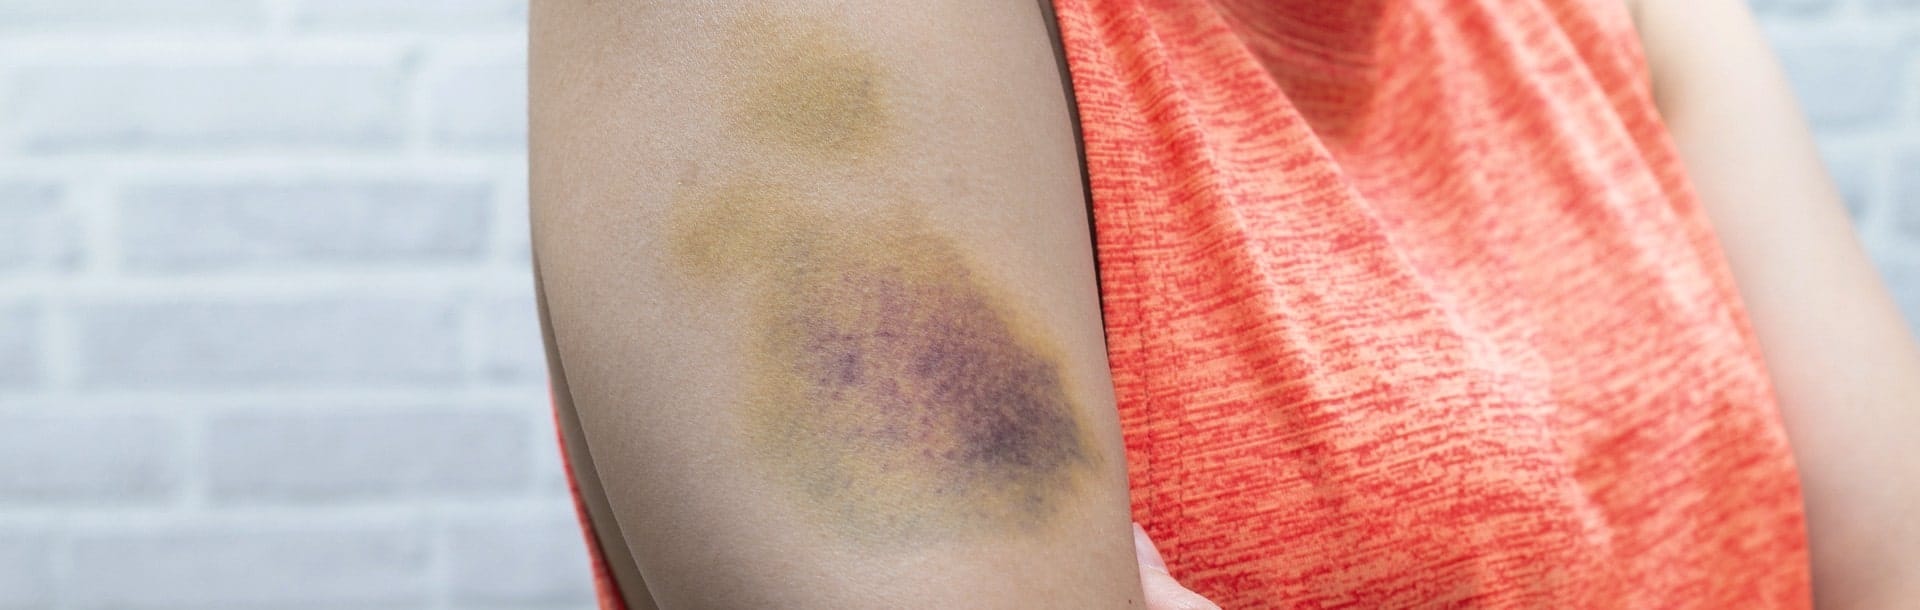 Woman with multiple bruises on her arms